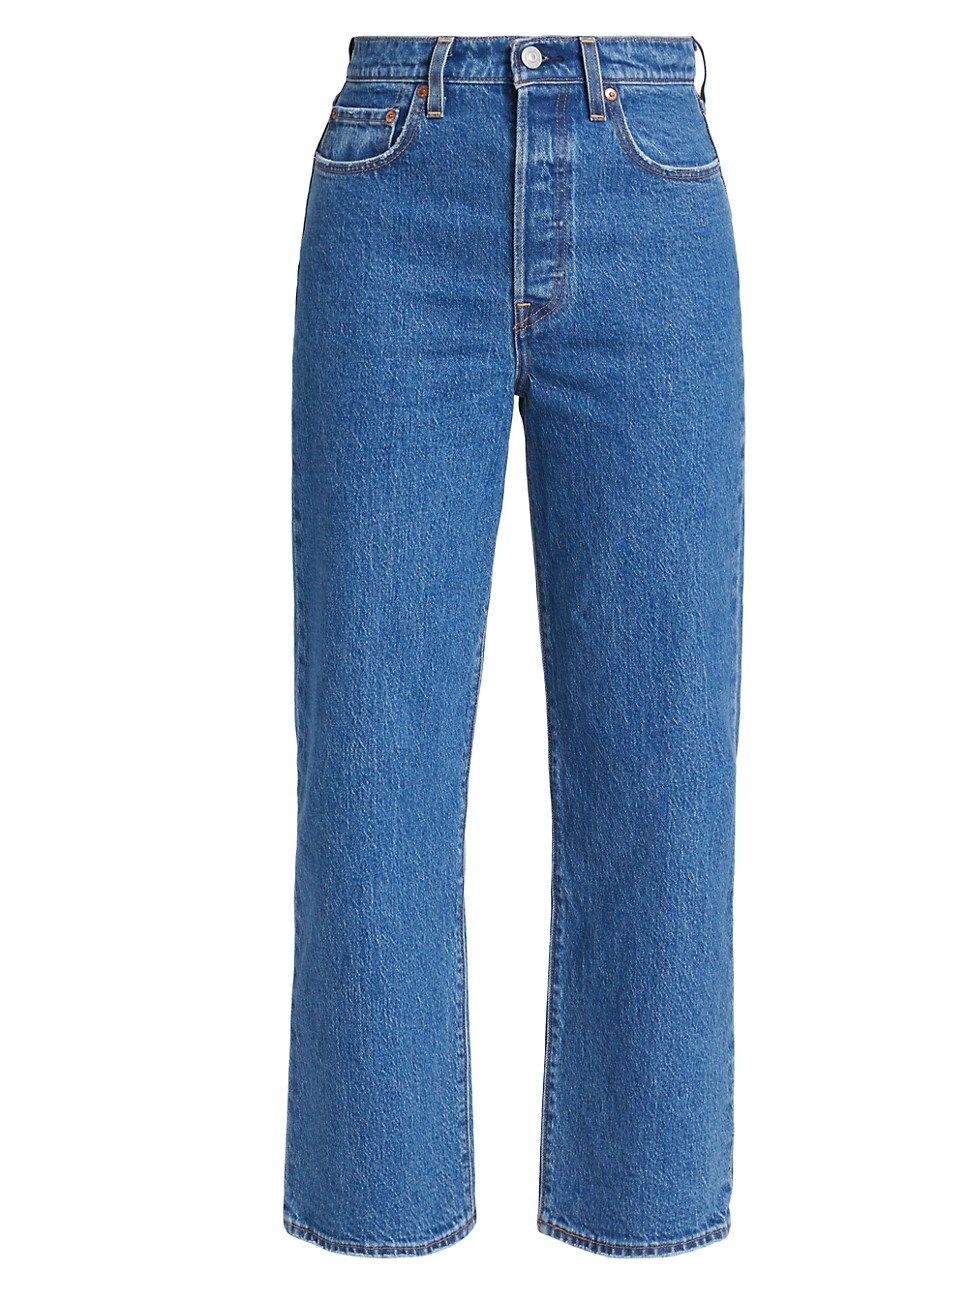 Ribcage High-Rise Straight-Leg Ankle Jeans | Saks Fifth Avenue